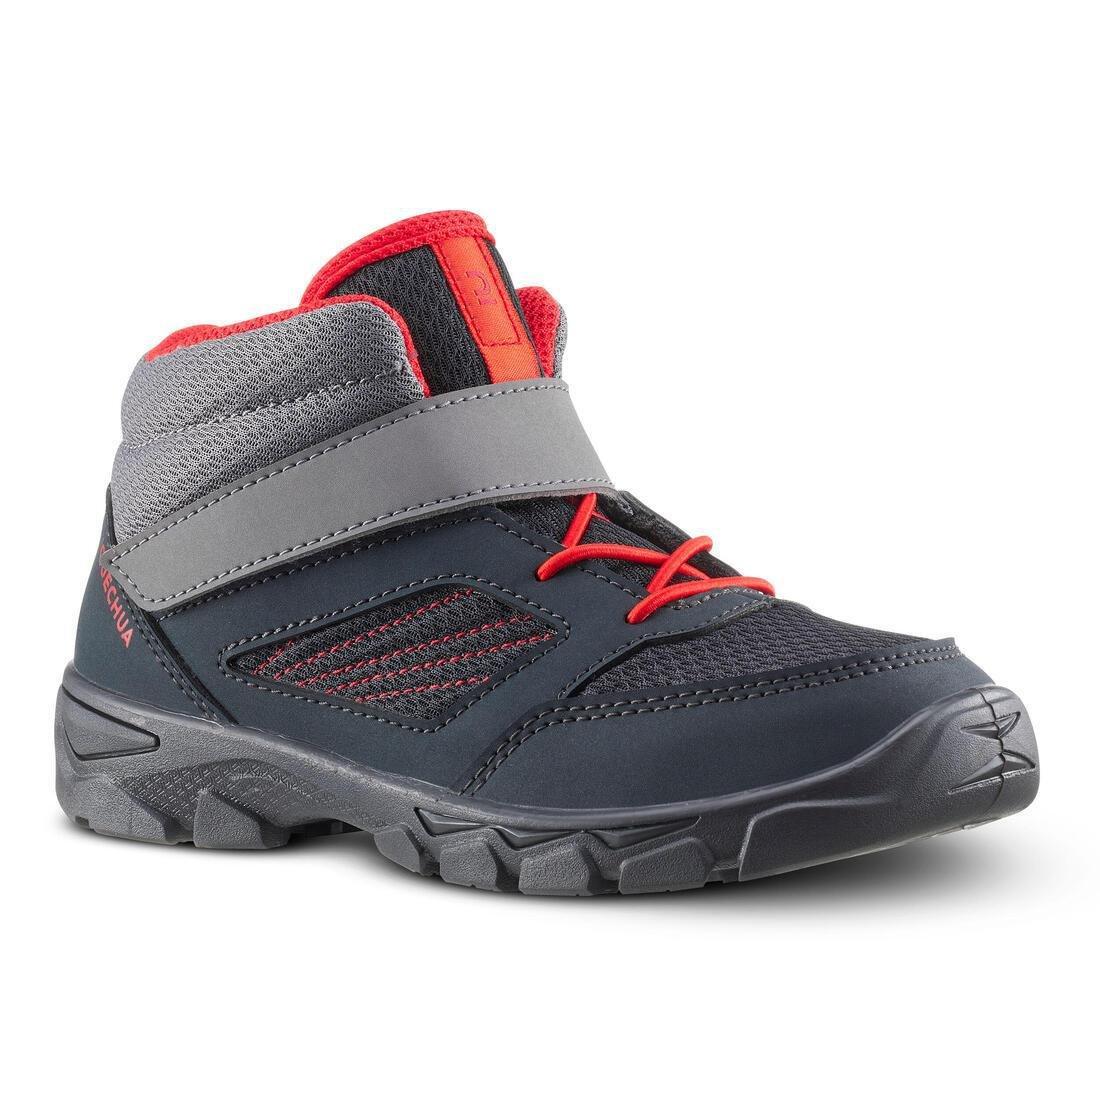 QUECHUA - Kids Boy Hiking Shoes With Rip-Tab Mh100 Mid From Jr Size 7 To Size 2, Grey